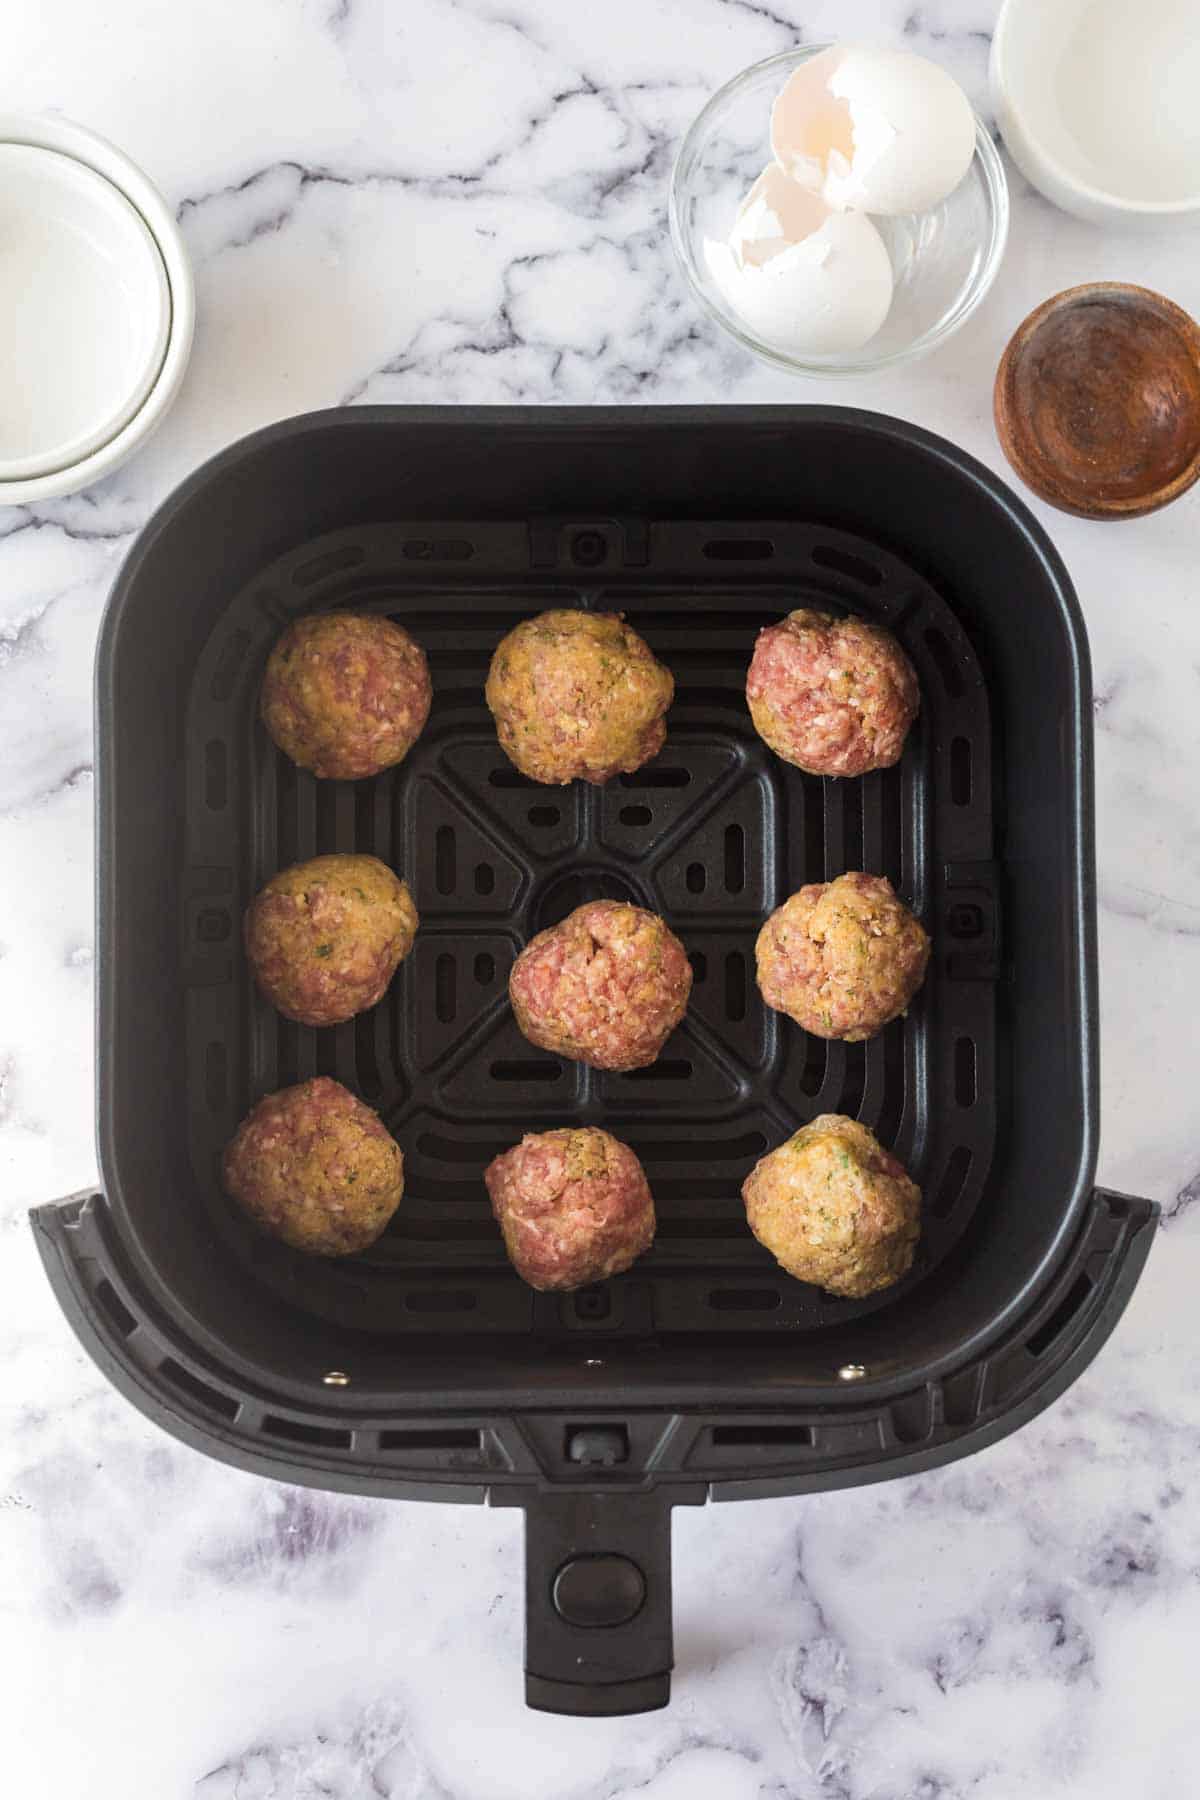 Meatballs in the air fryer ready to be cooked.